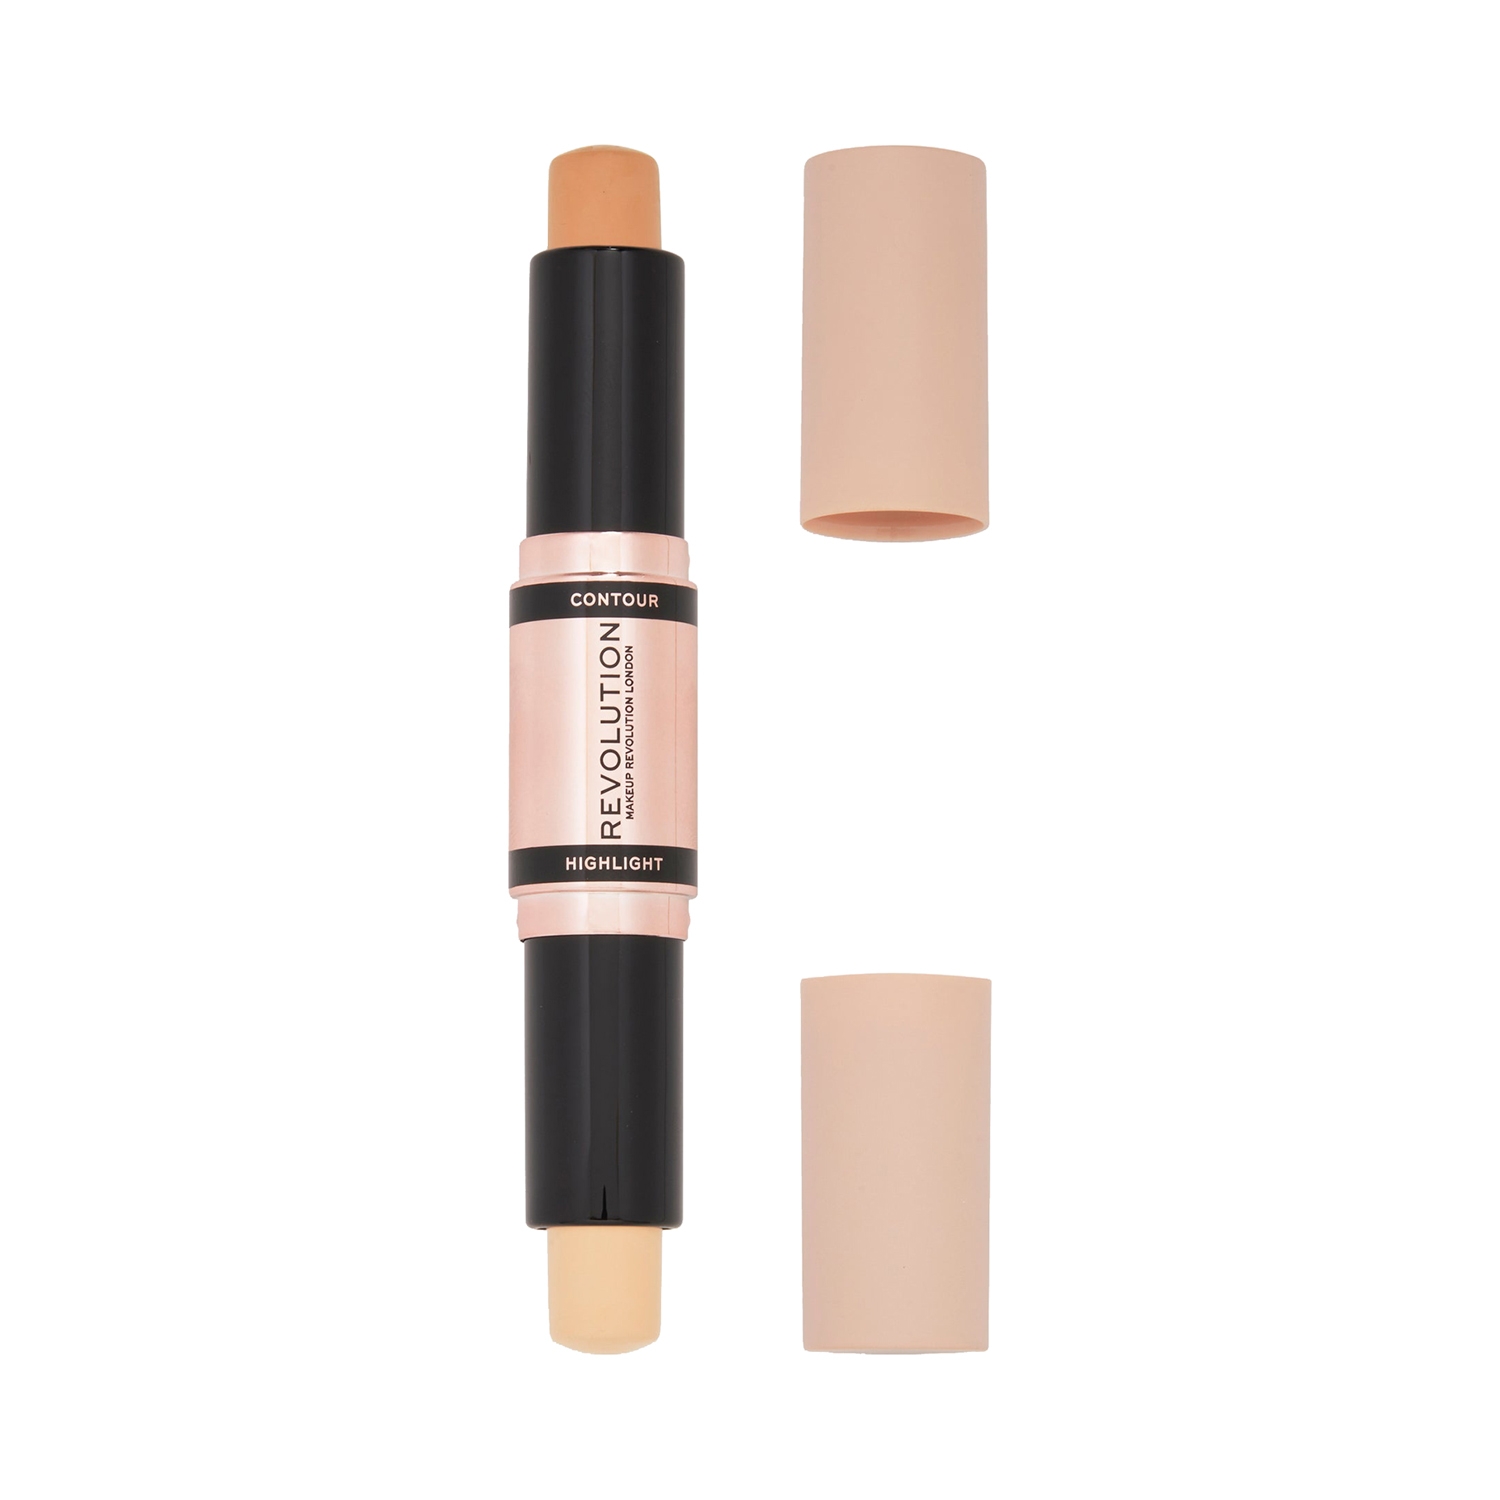 Shop for Contour Online at Best Price in India - Tira